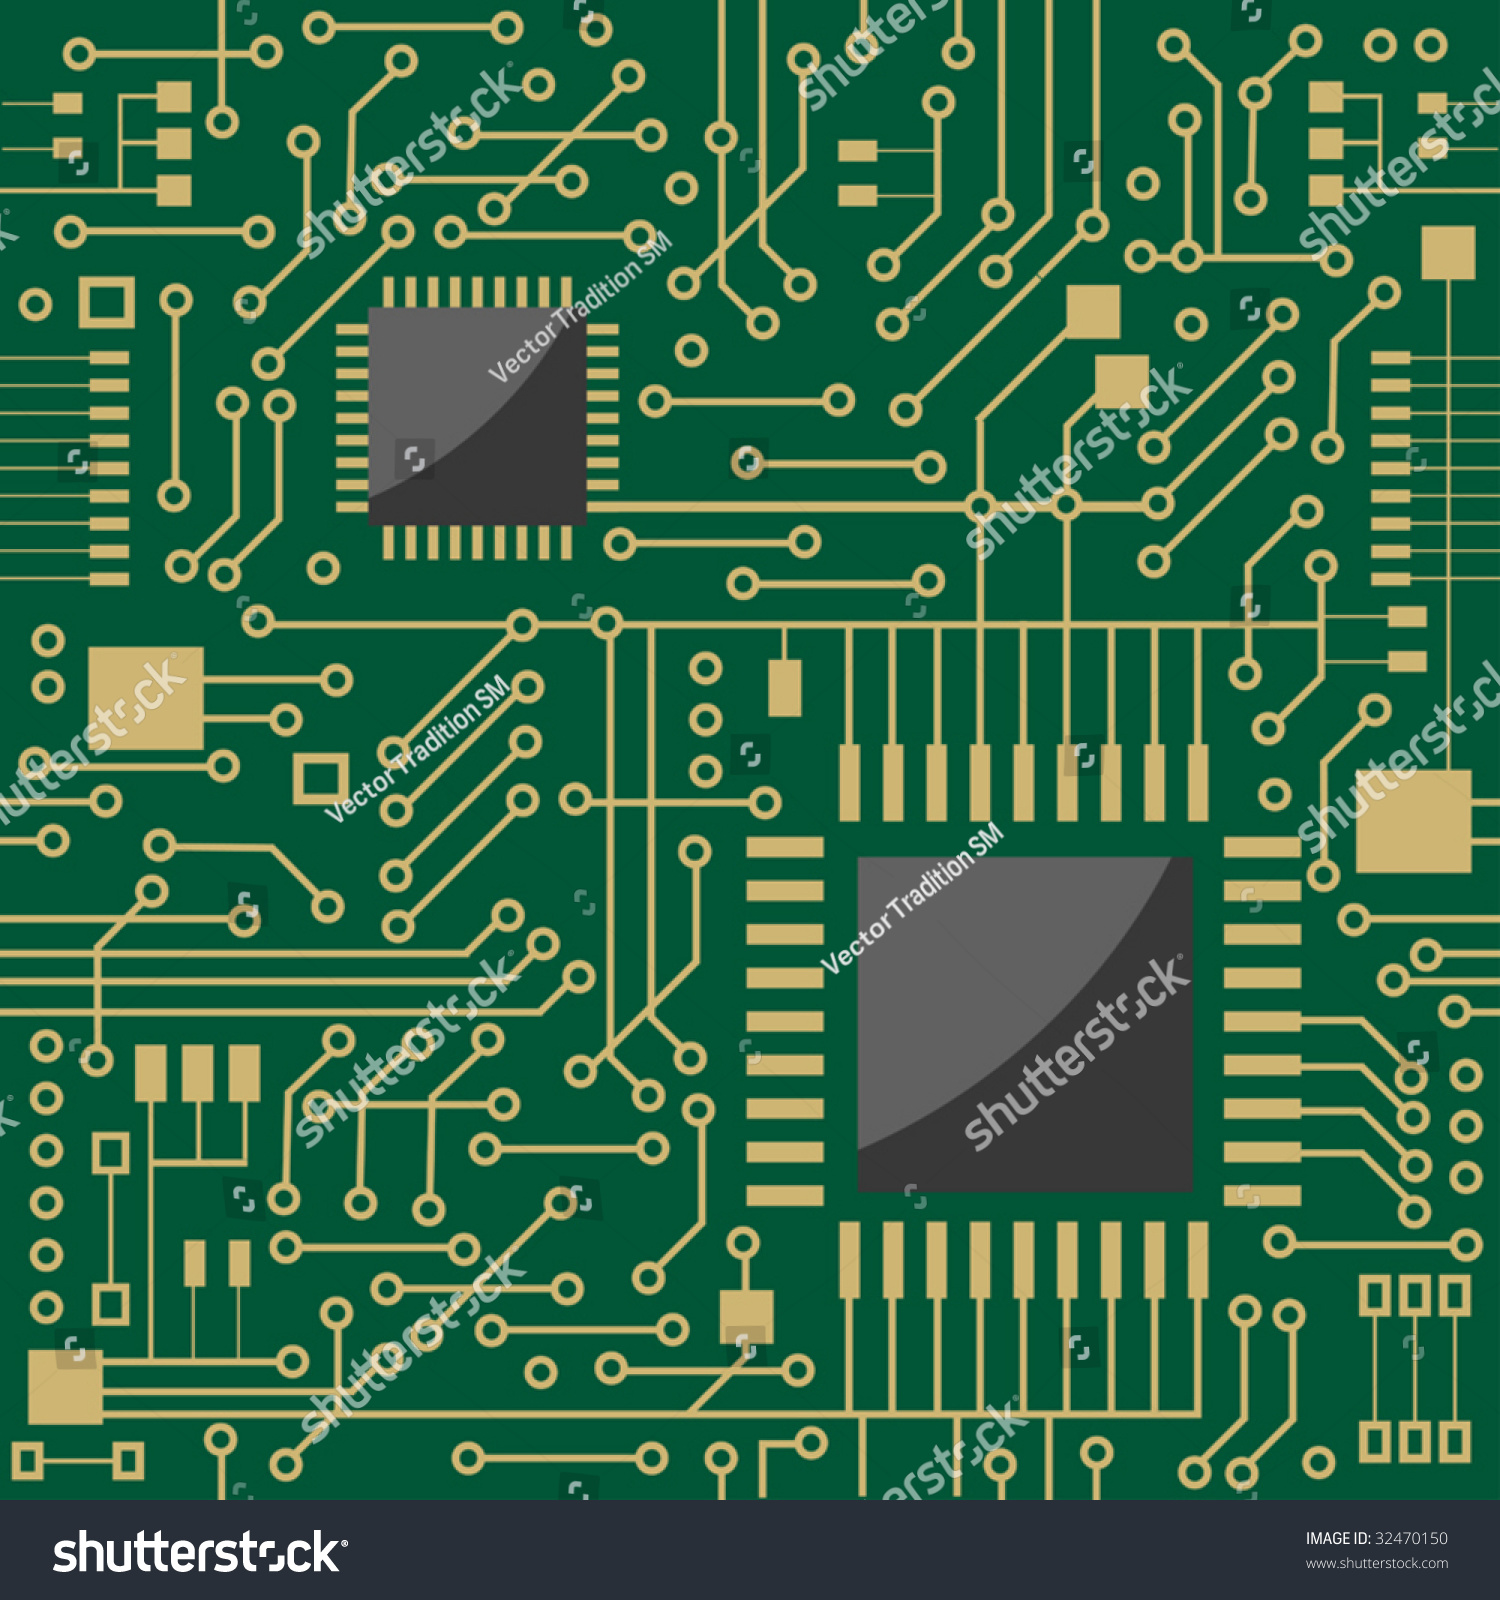 Seamless Background Showing A Schematic Diagram For An Electronic